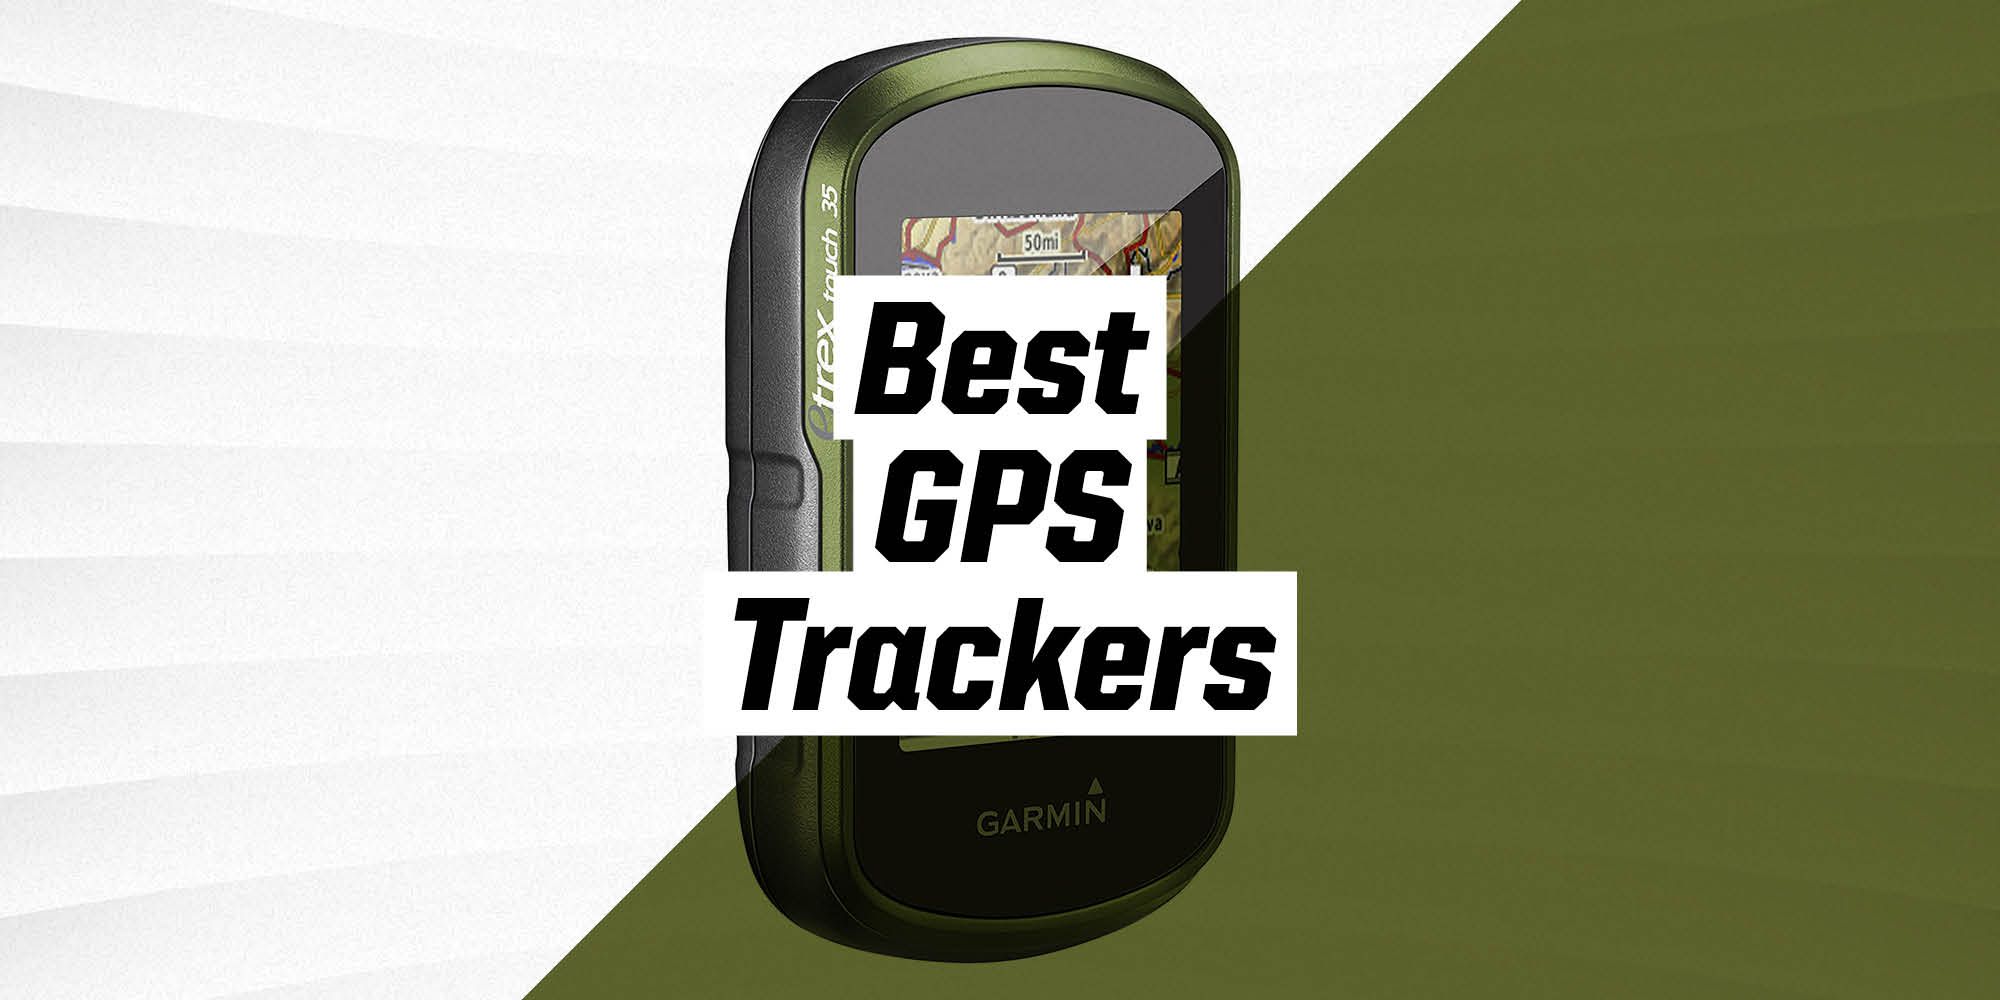 The 9 Best Trackers 2021 - GPS Trackers & Hiking